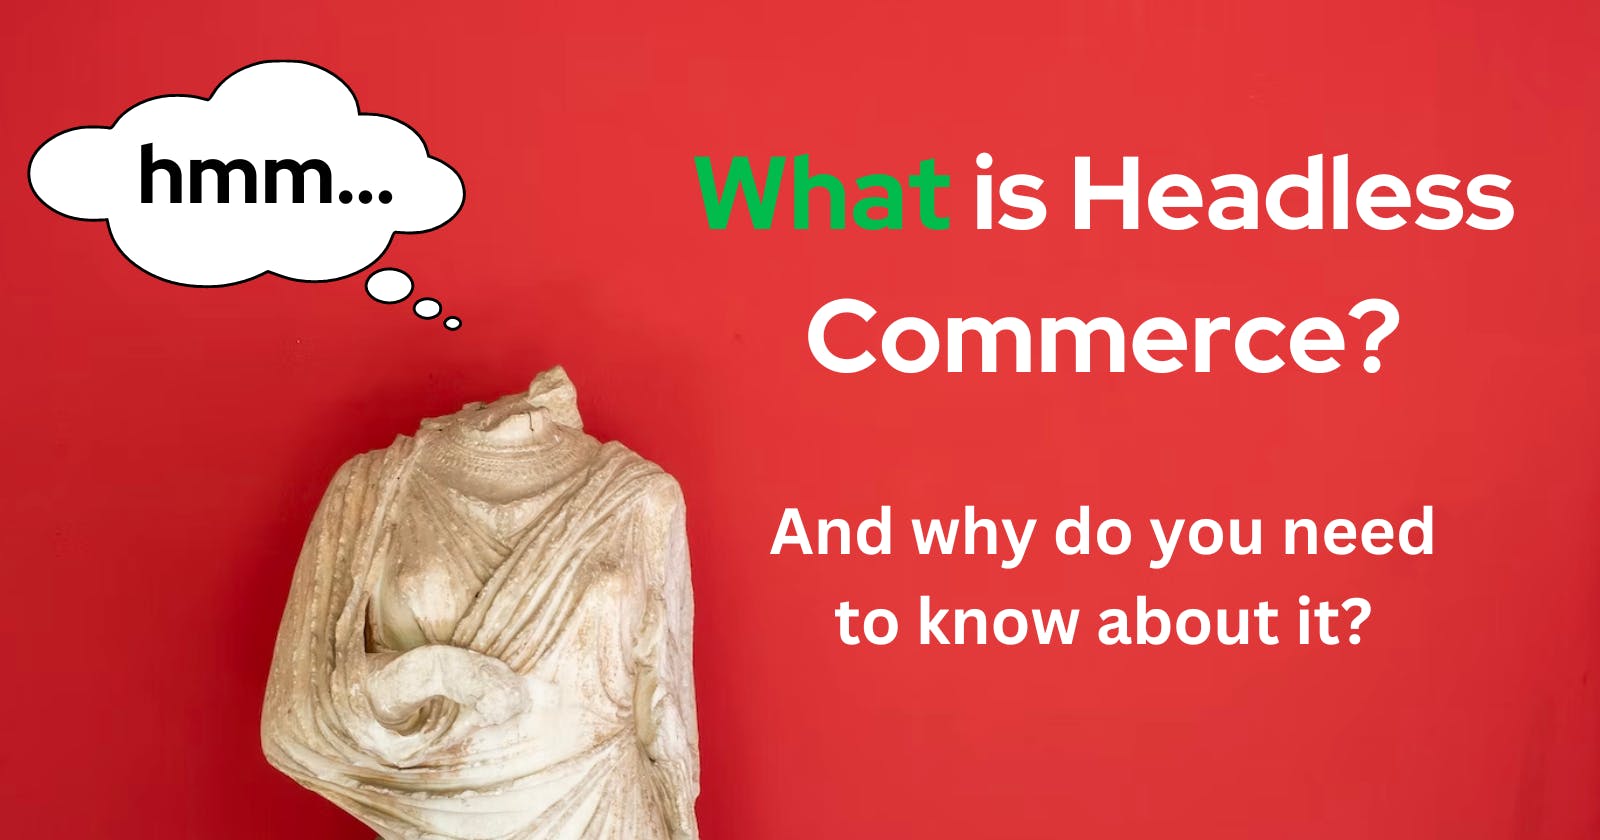 What is Headless Commerce? And why do you need to know about it?